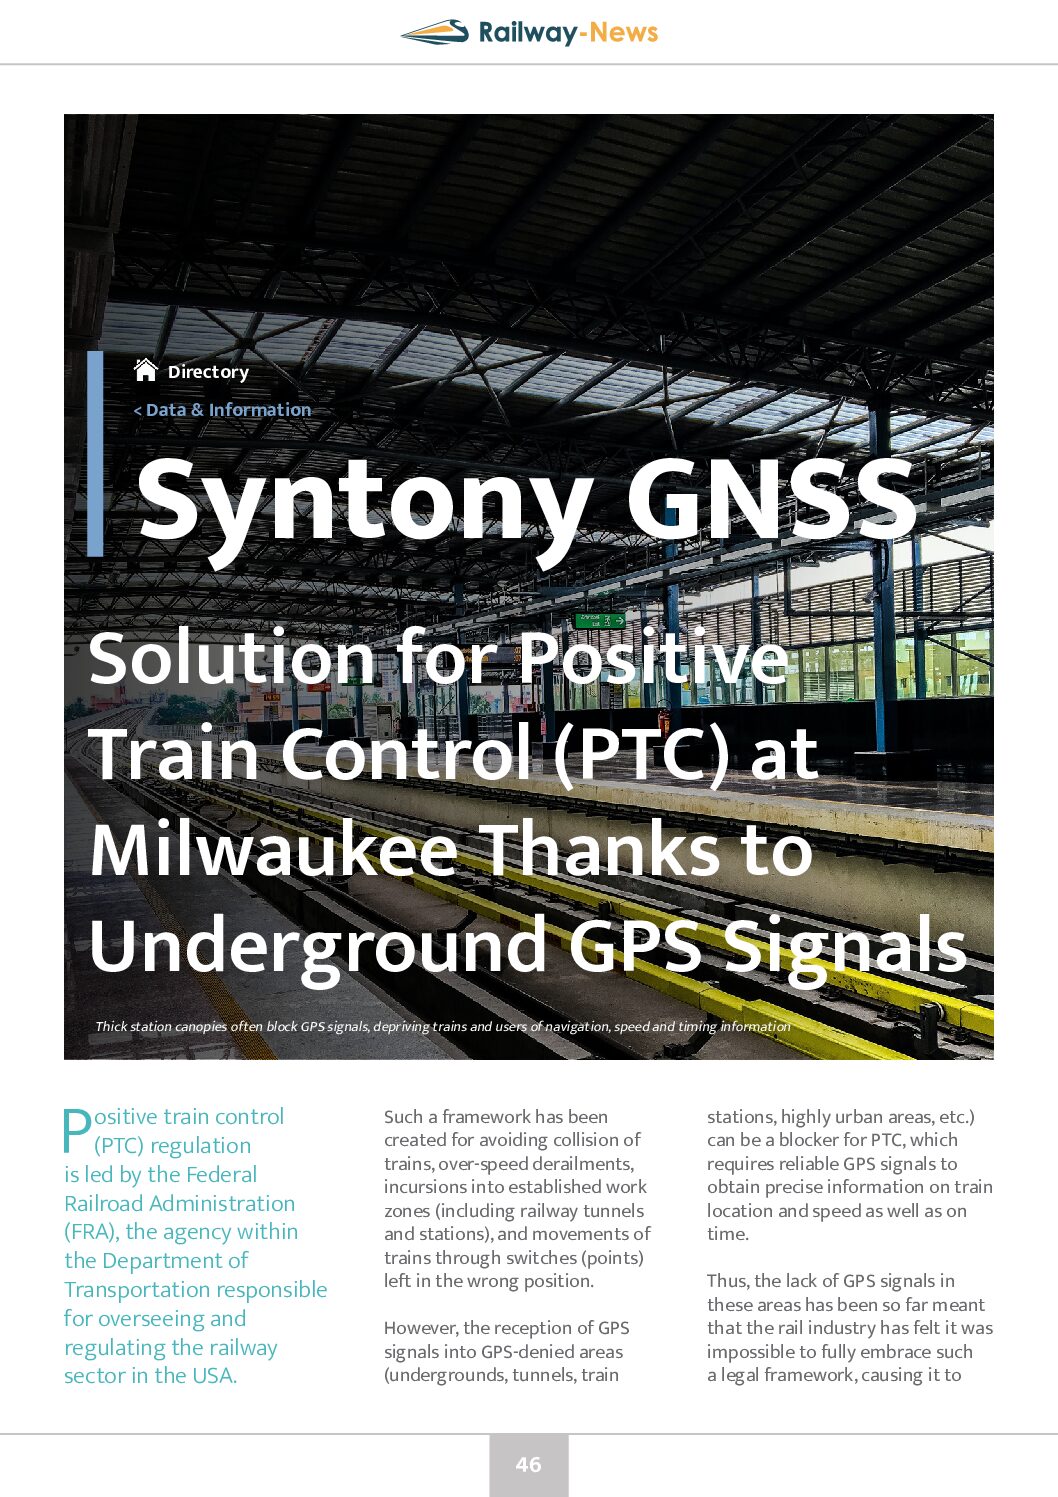 Syntony GNSS – Solution for Positive Train Control at Milwaukee